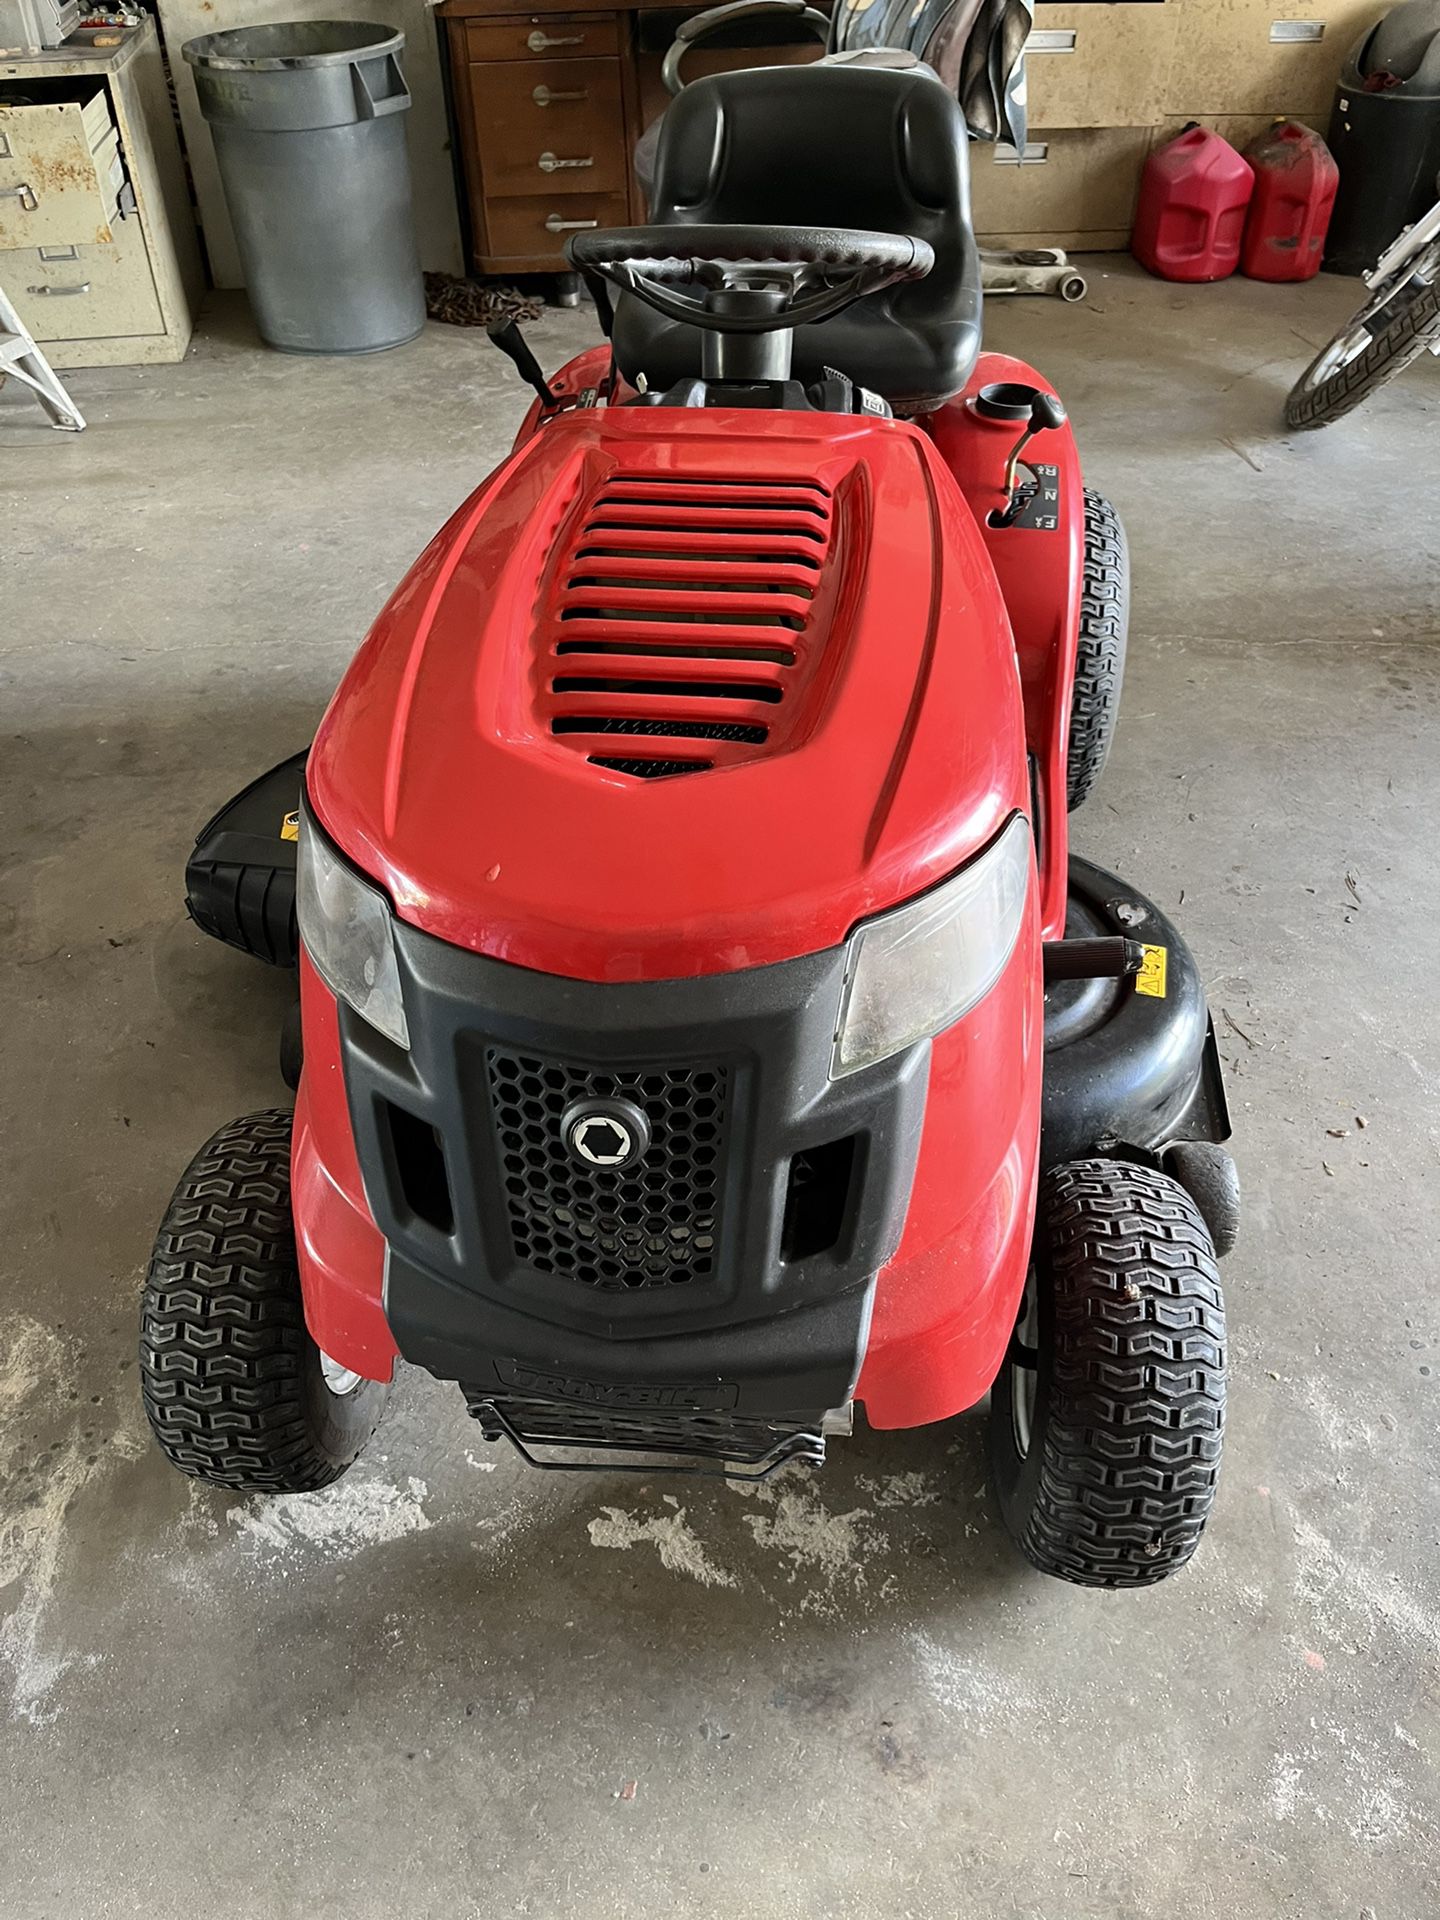 Troy Bilt Riding Lawnmower Completely Refurbished 17 Hp 42” Cut For